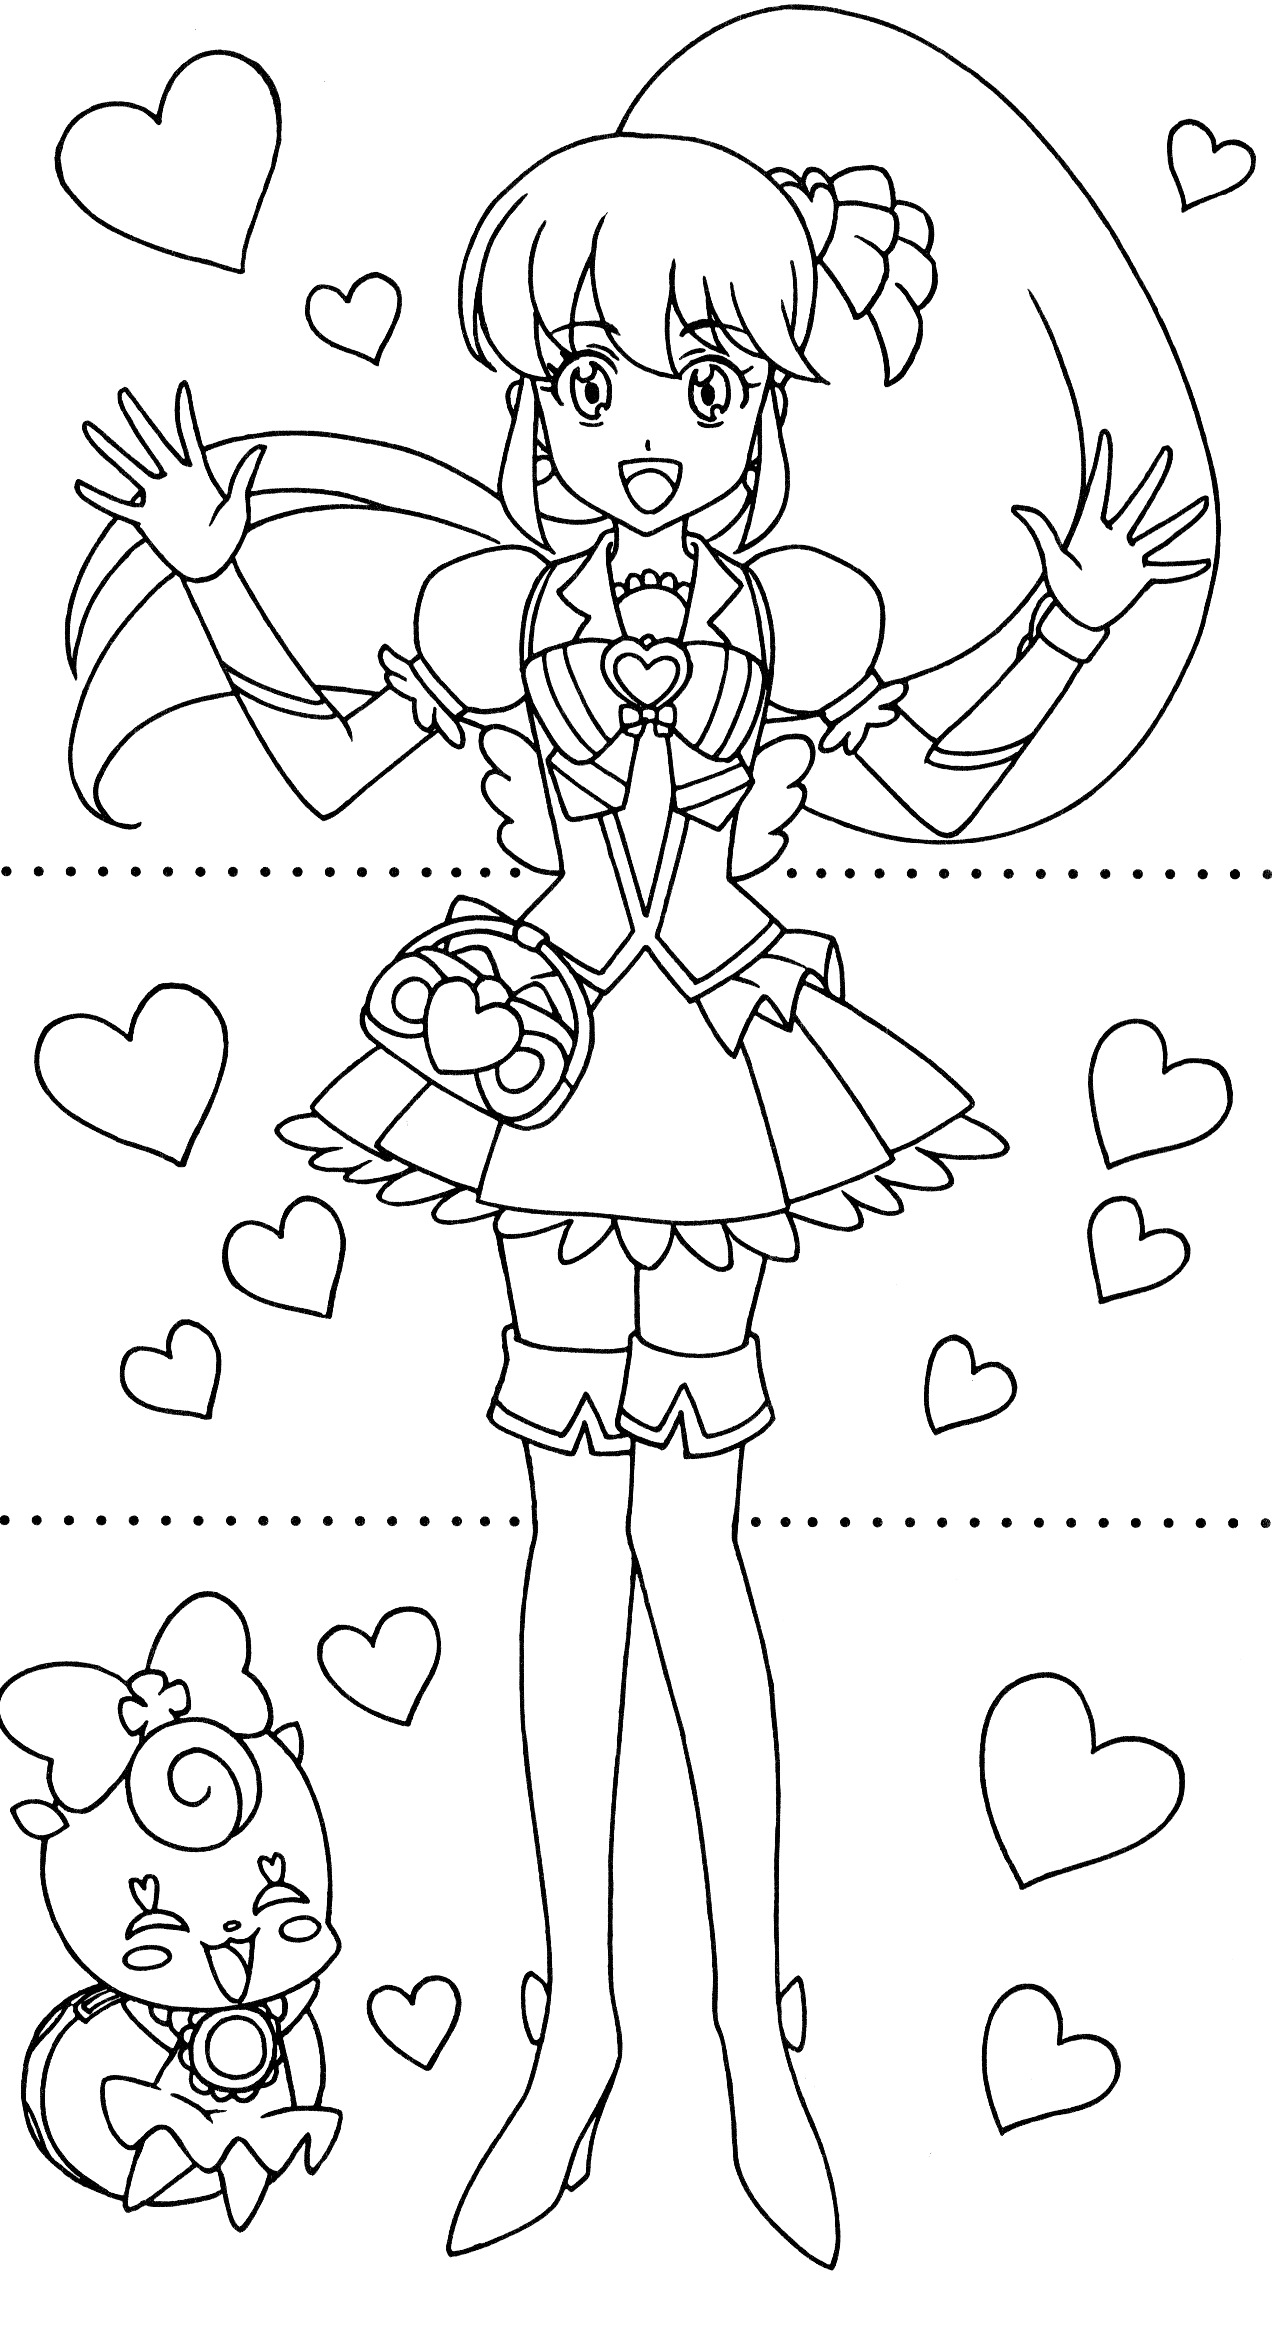 Happiness Charge Precure Dressup Coloring Book 32